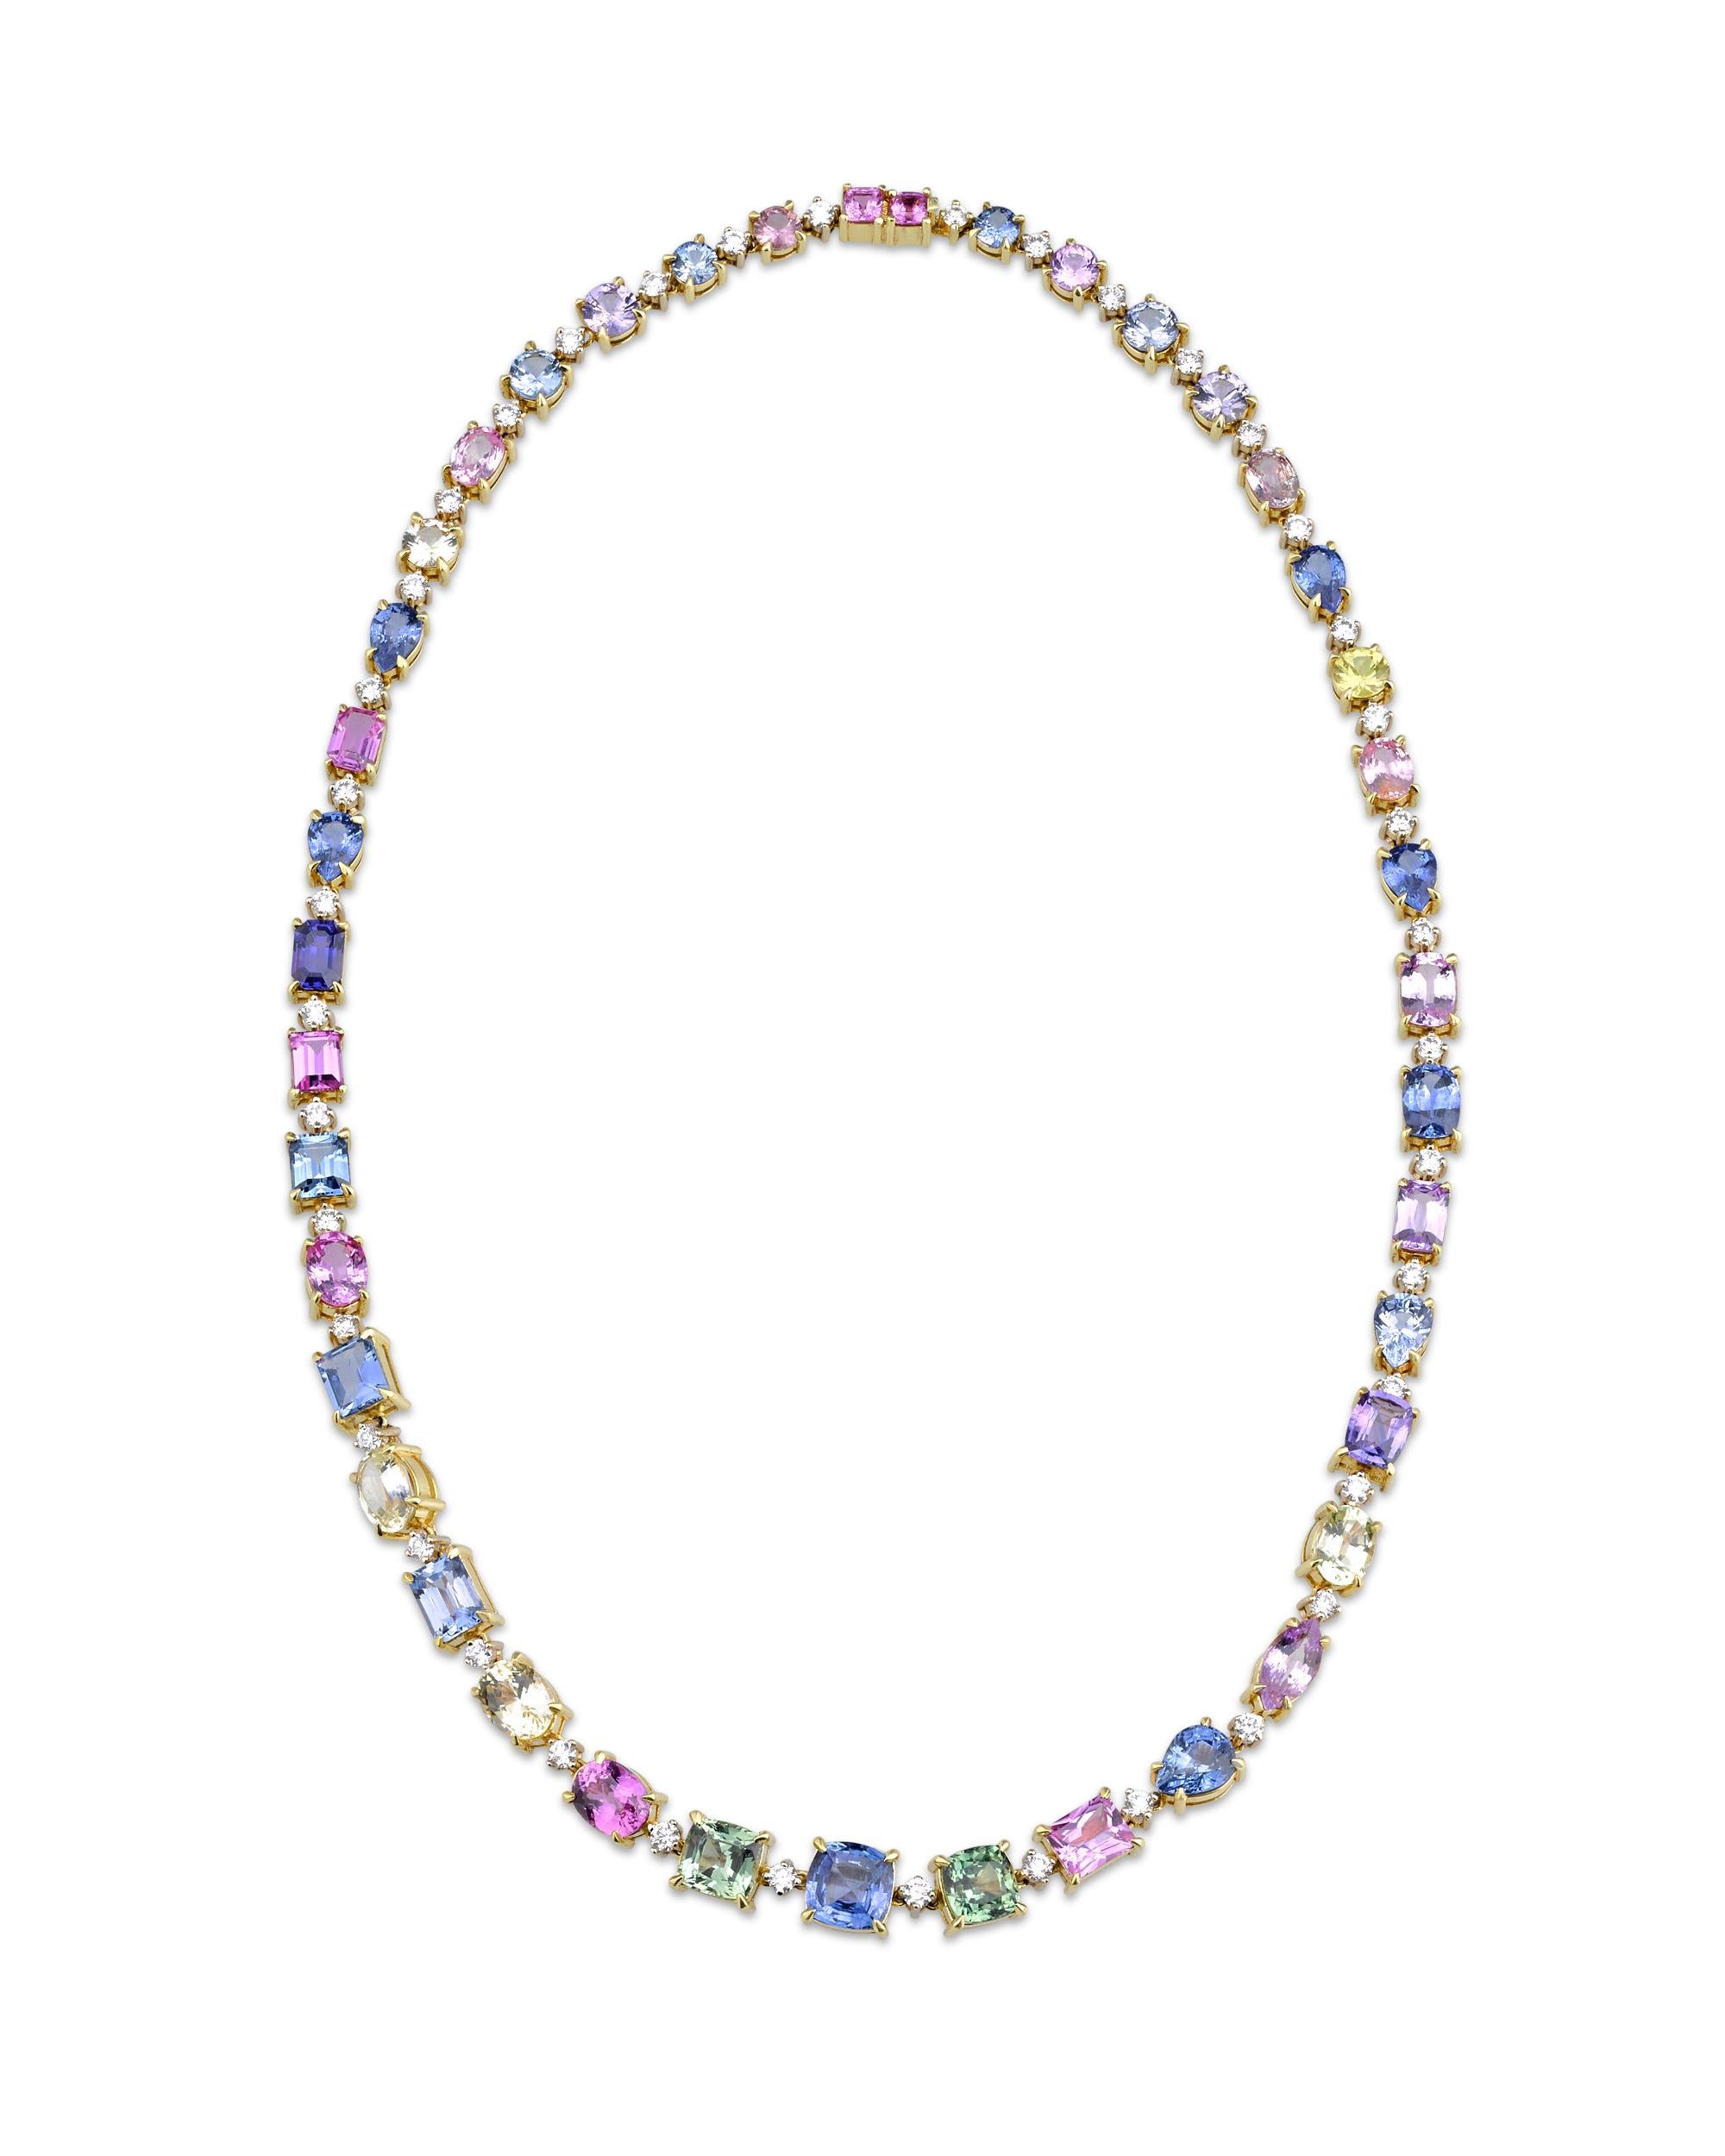 This extraordinary, multi-color sapphire and diamond necklace showcases 57.39 total carats of Ceylon sapphires. The spectacular sapphires exhibit a vibrant array of hues, from brilliant yellow and vivid violet to sea green, bold blue, and pale pink.